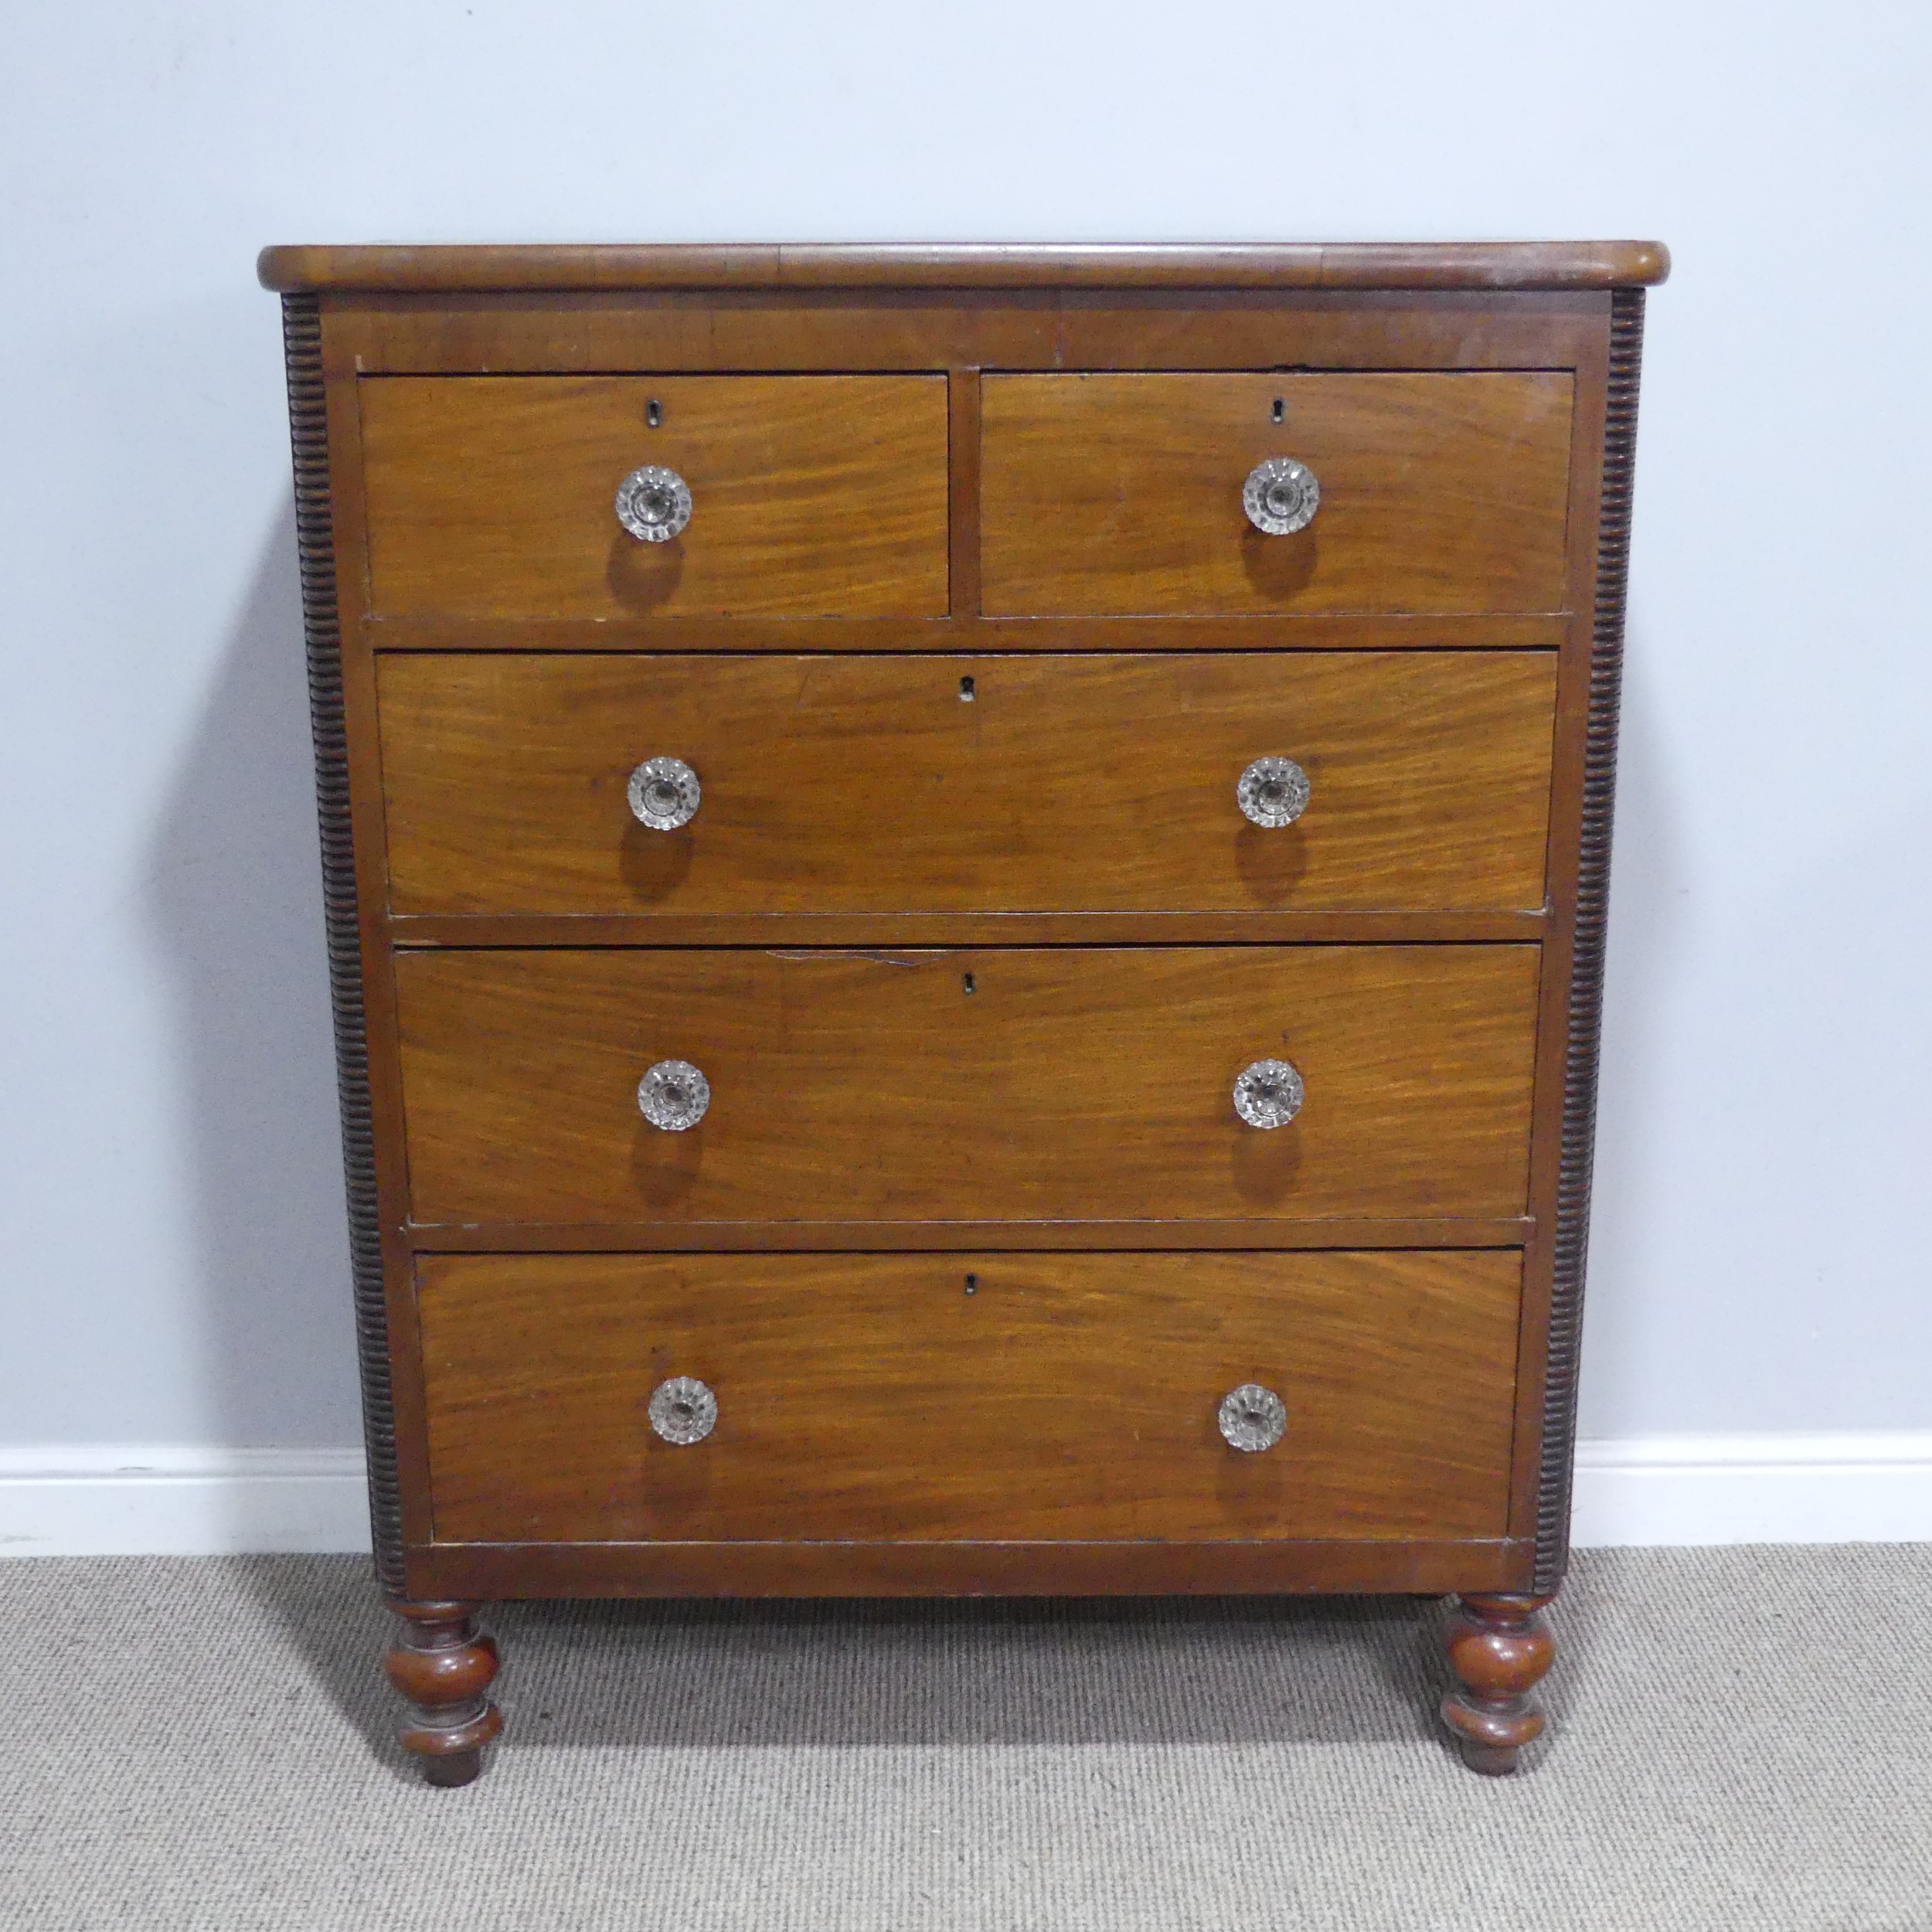 A Victorian stained pine and mahogany Chest of Drawers, with original glass handles, W 101 cm x H